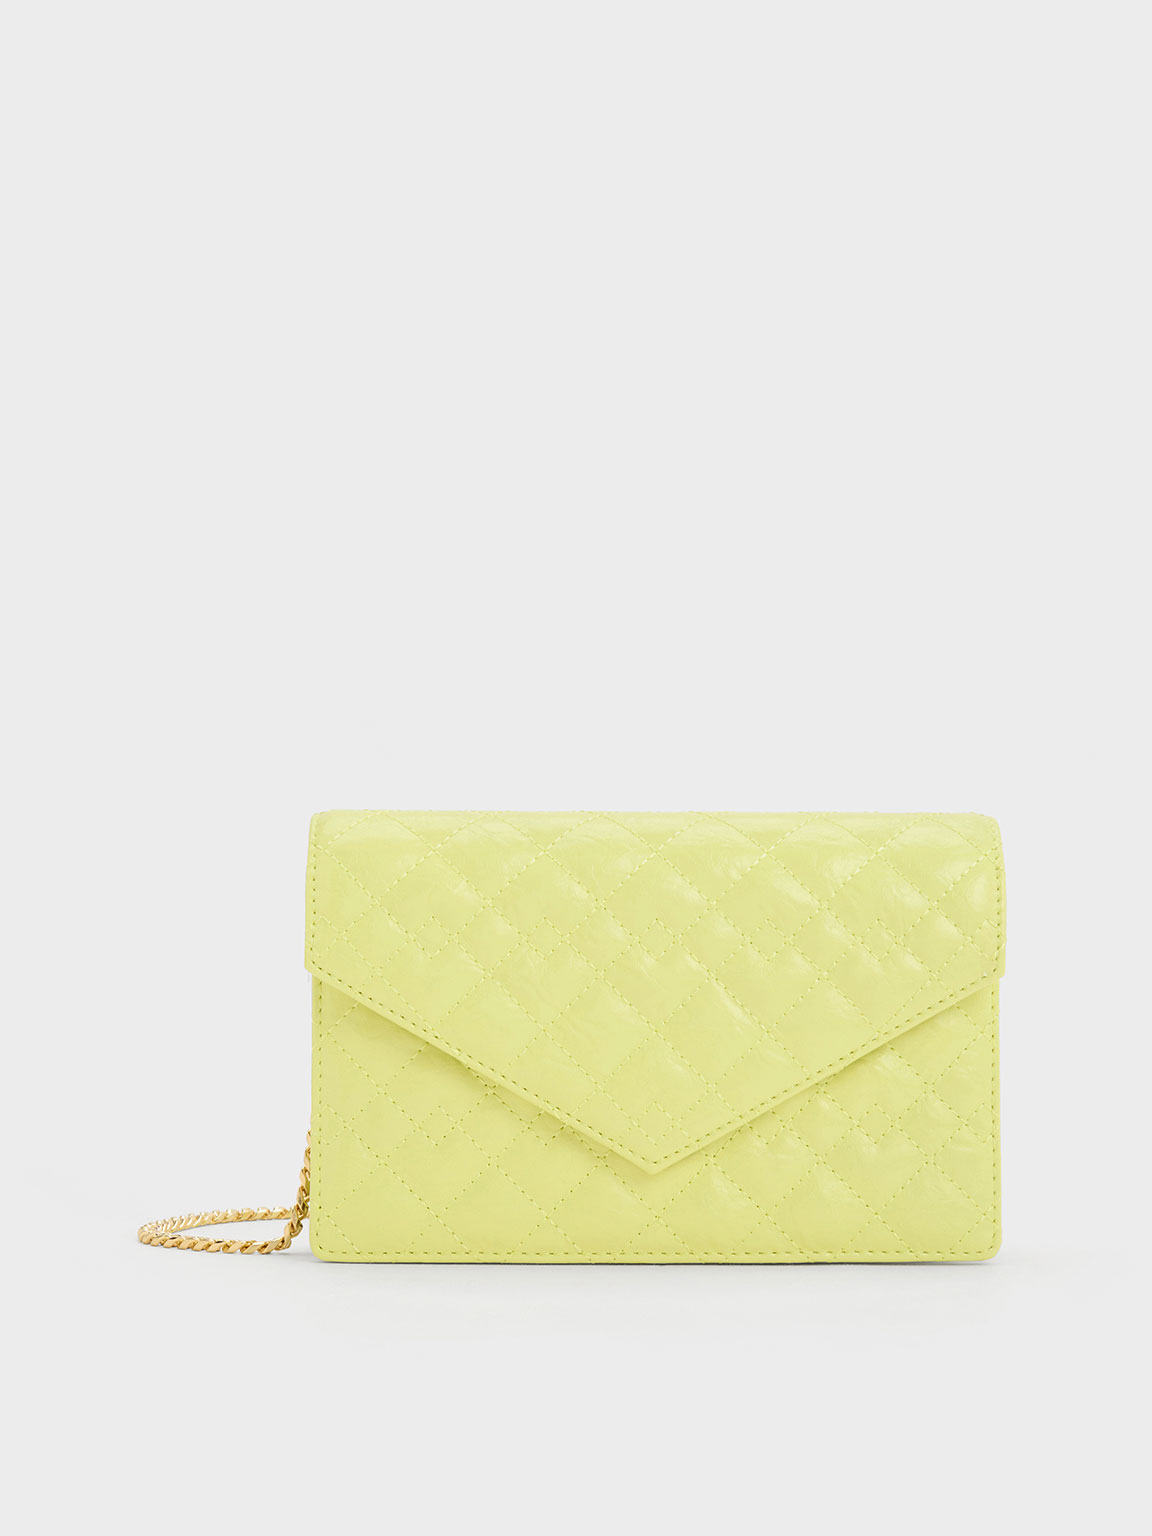 Duo Quilted Envelope Clutch